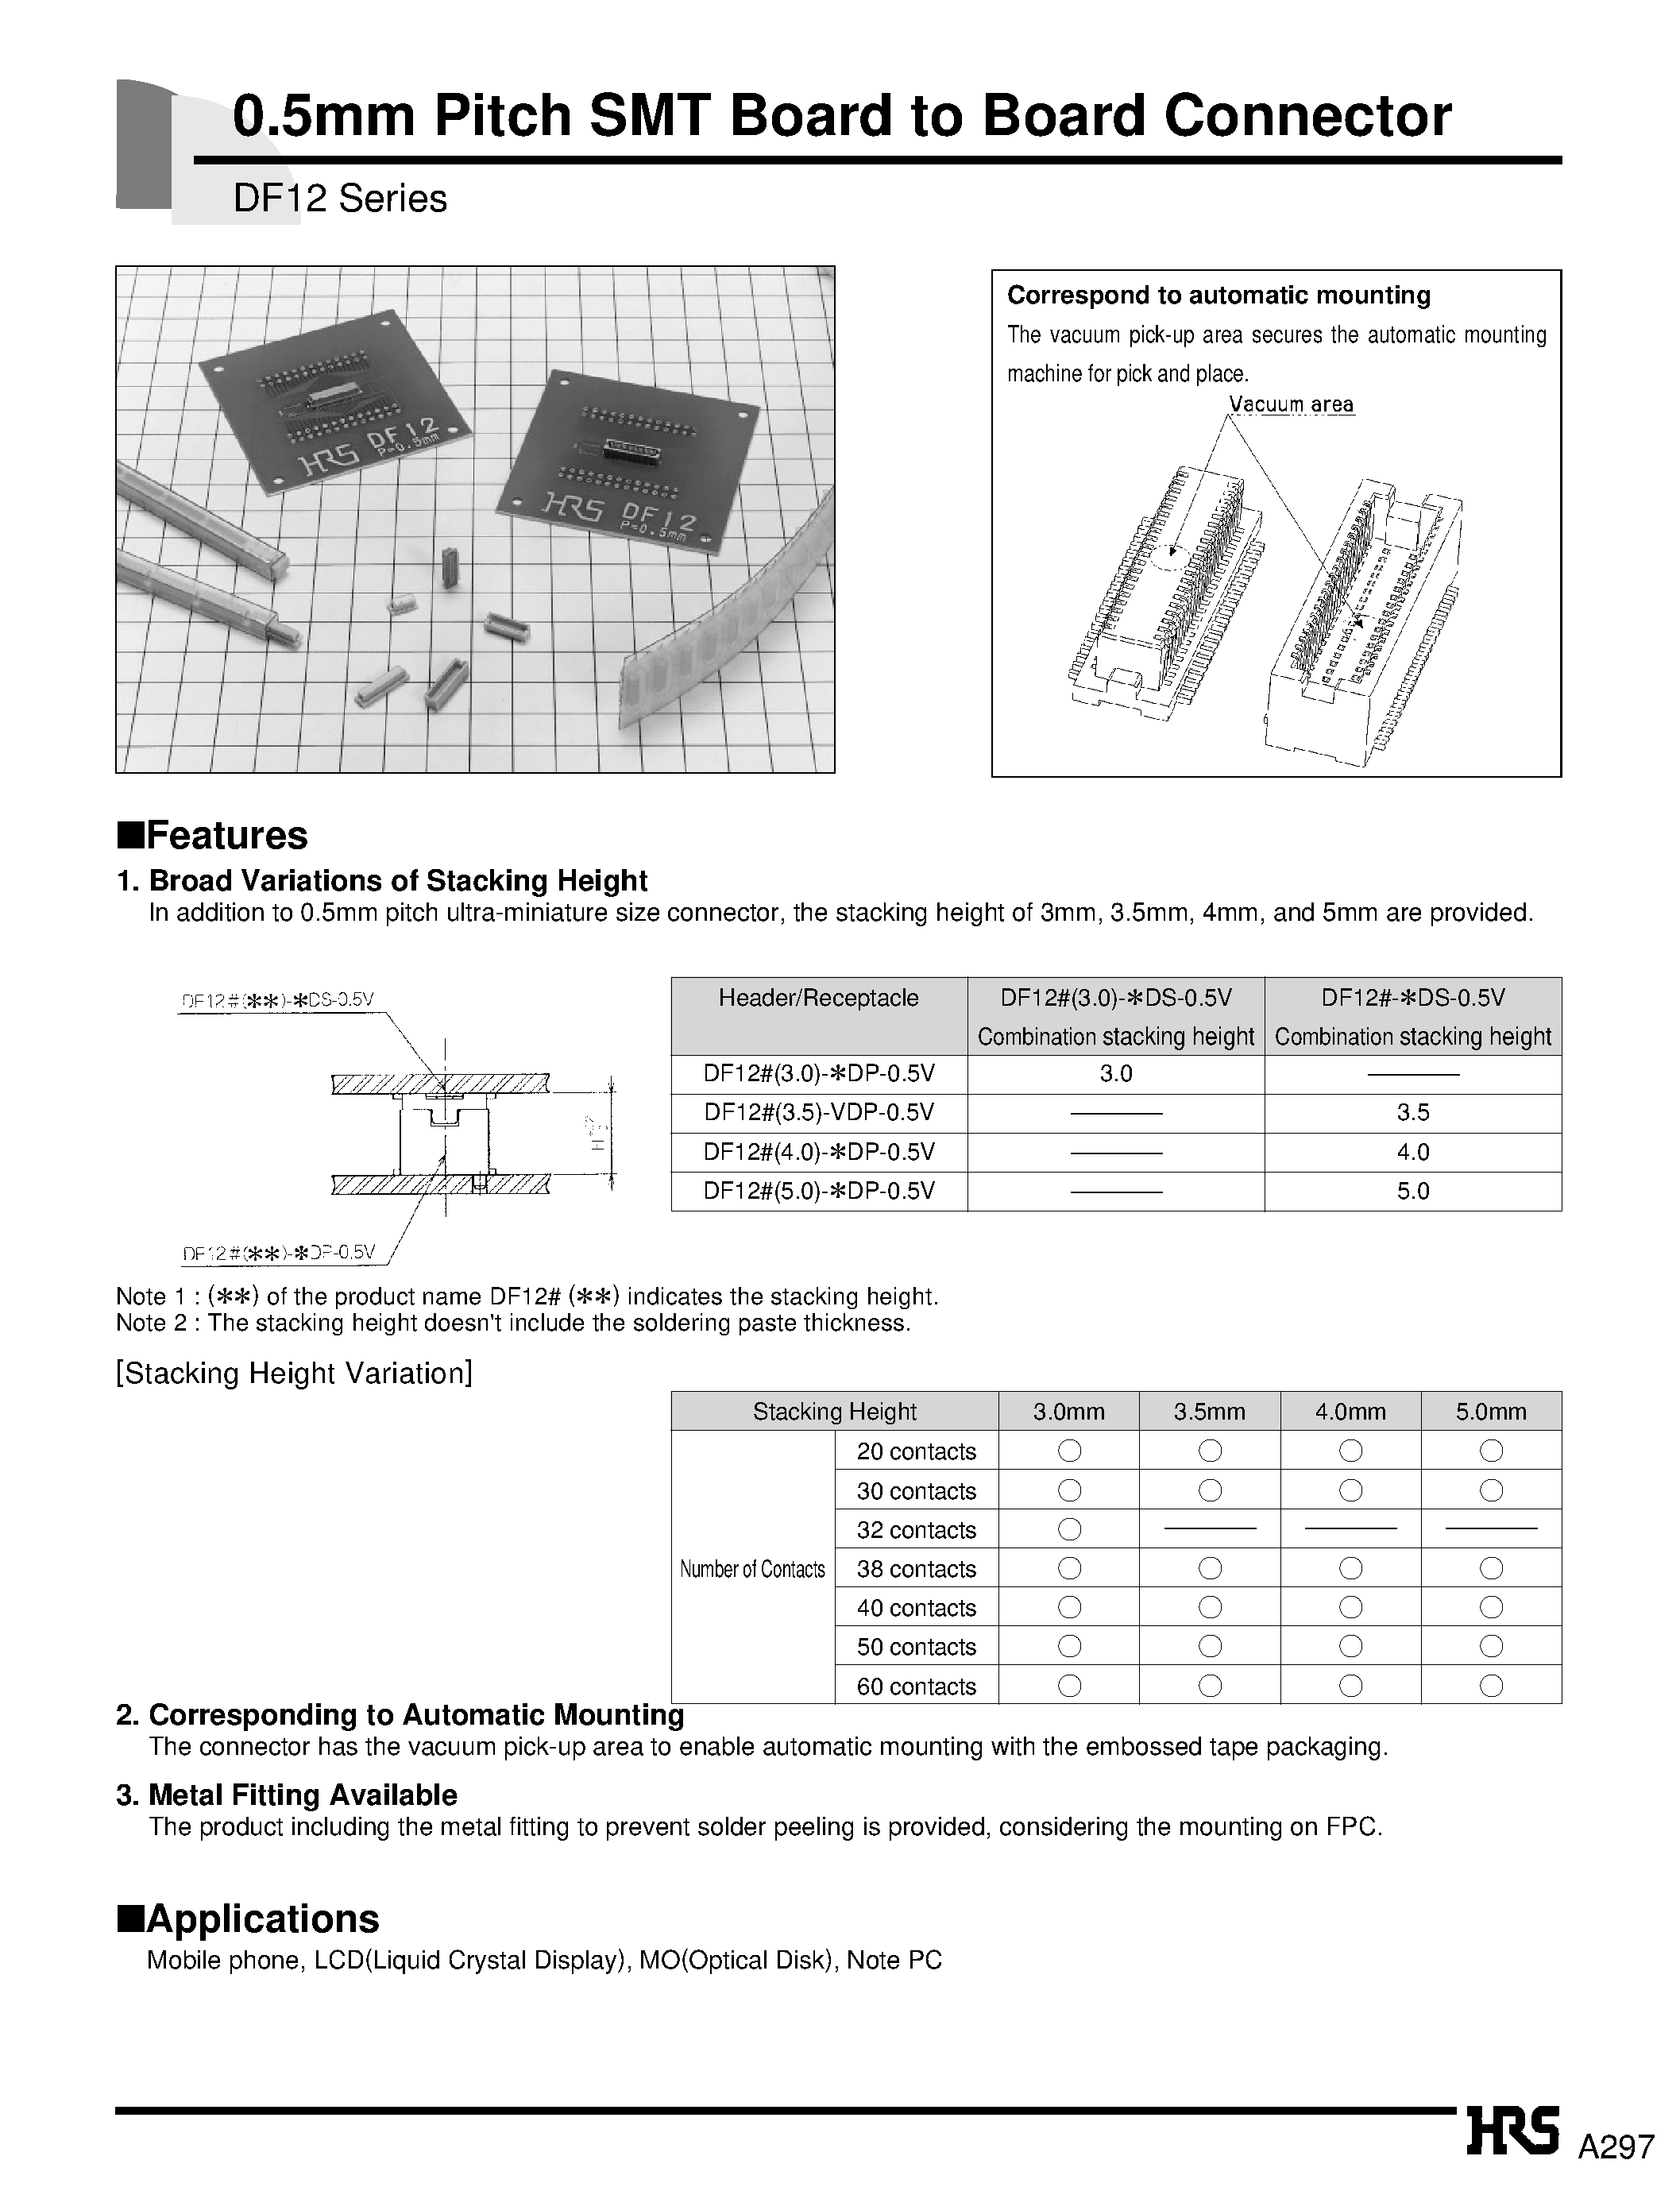 Datasheet DF12-40DP-0.5V - 0.5mm Pitch SMT Board to Board Connector page 1